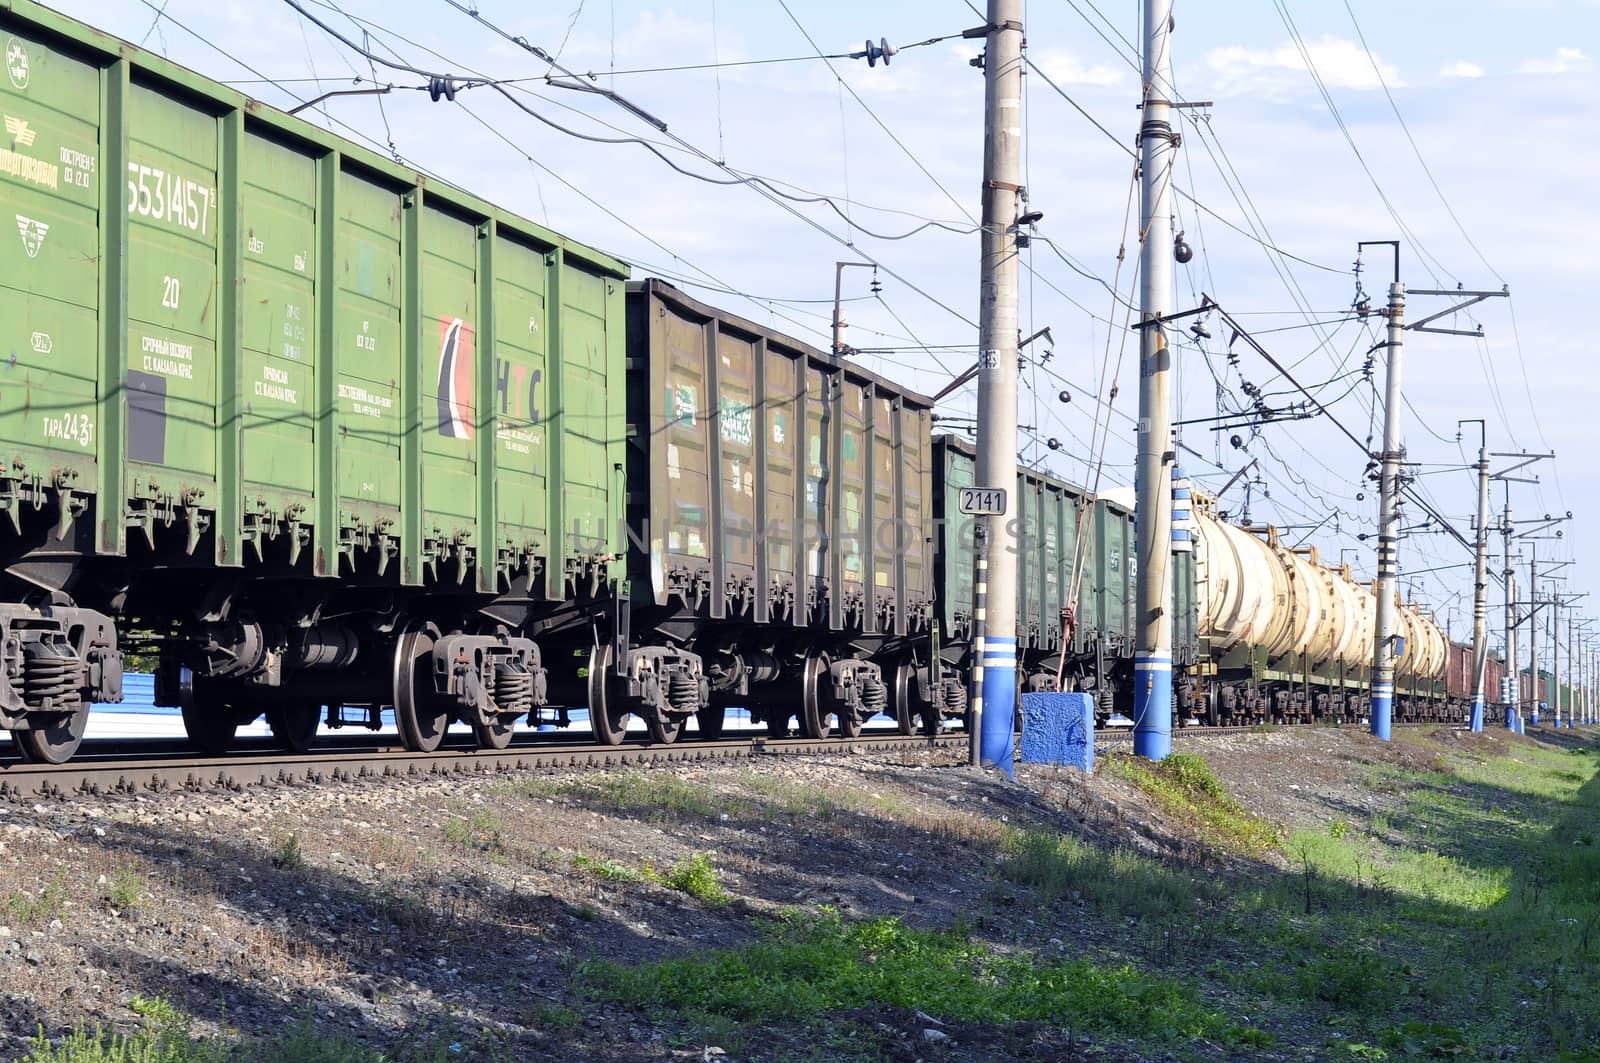 The cargo train on rails in the summer afternoon. by veronka72